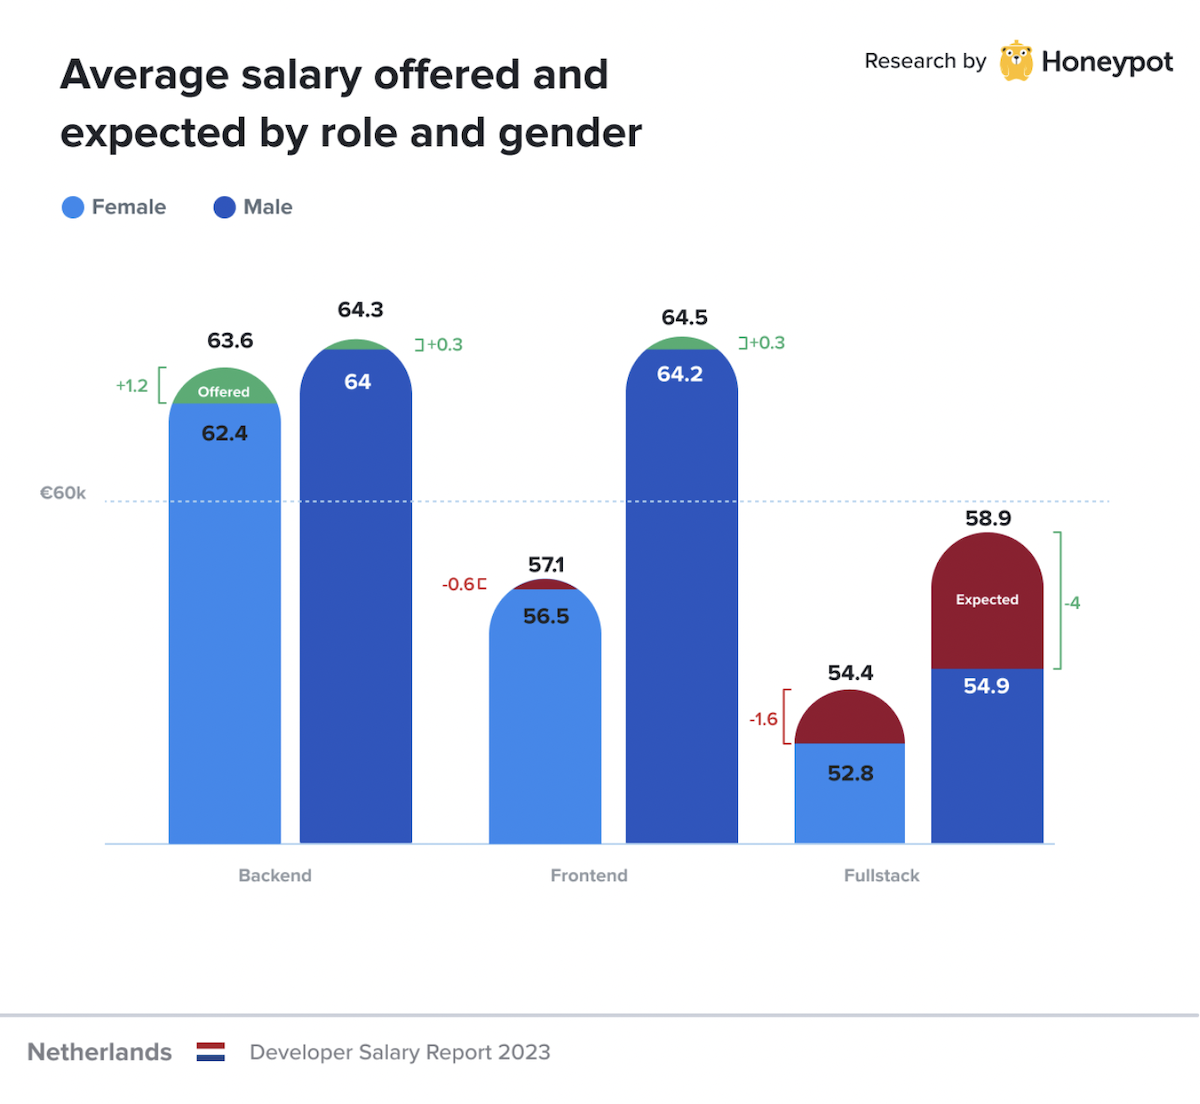 Netherlands – Average of offered and expected salary by role and gender